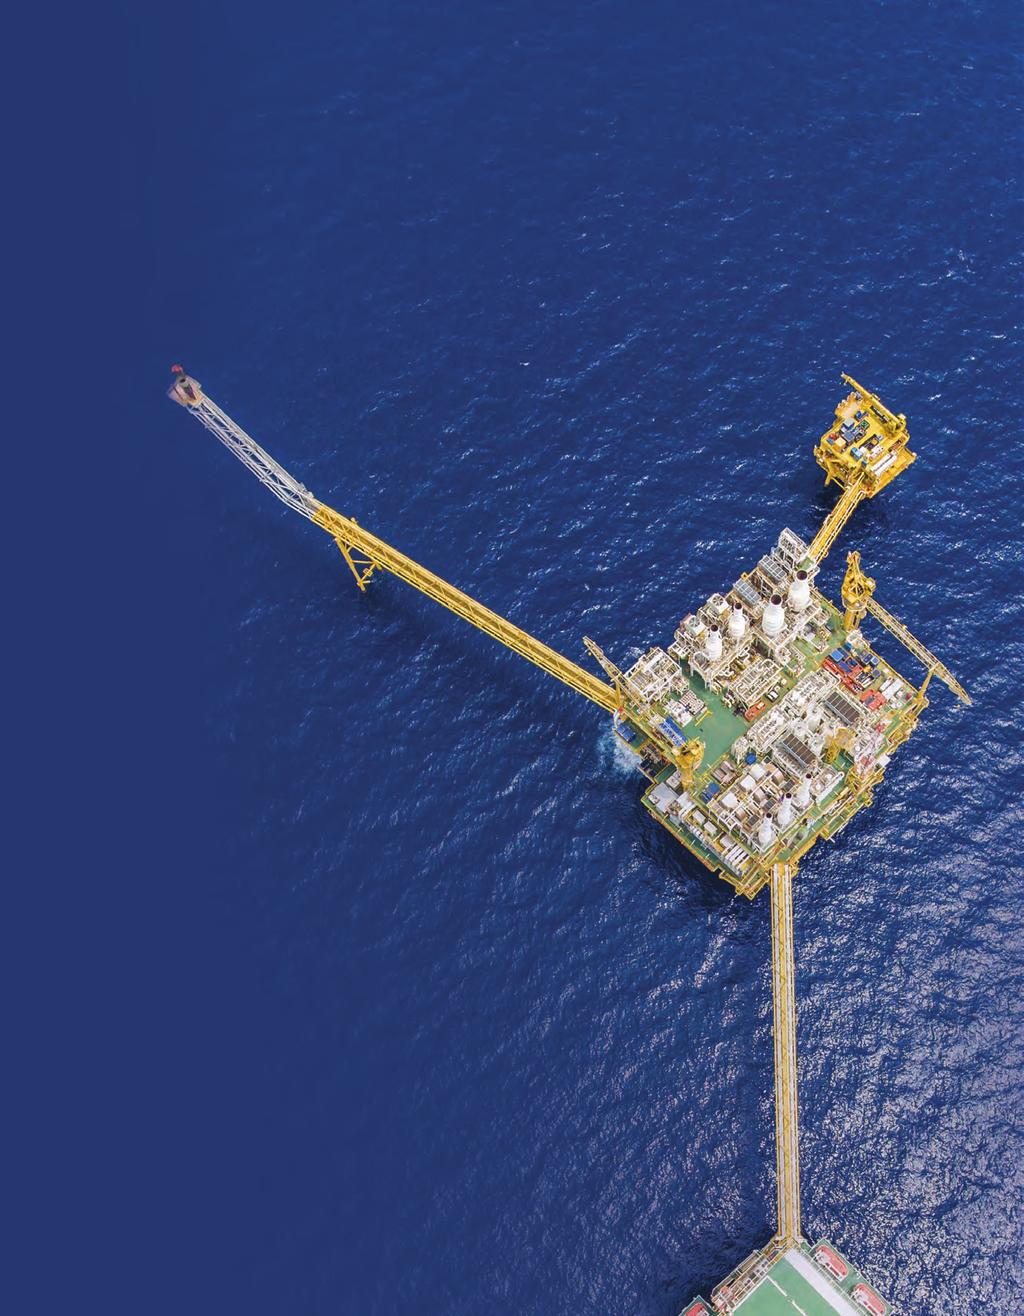 ABOUT OFFSHORE ENGINEER For over 40 years, Offshore Engineer has been the leading source of in-depth analysis, insightful editorial and the latest technology developments shaping the offshore energy